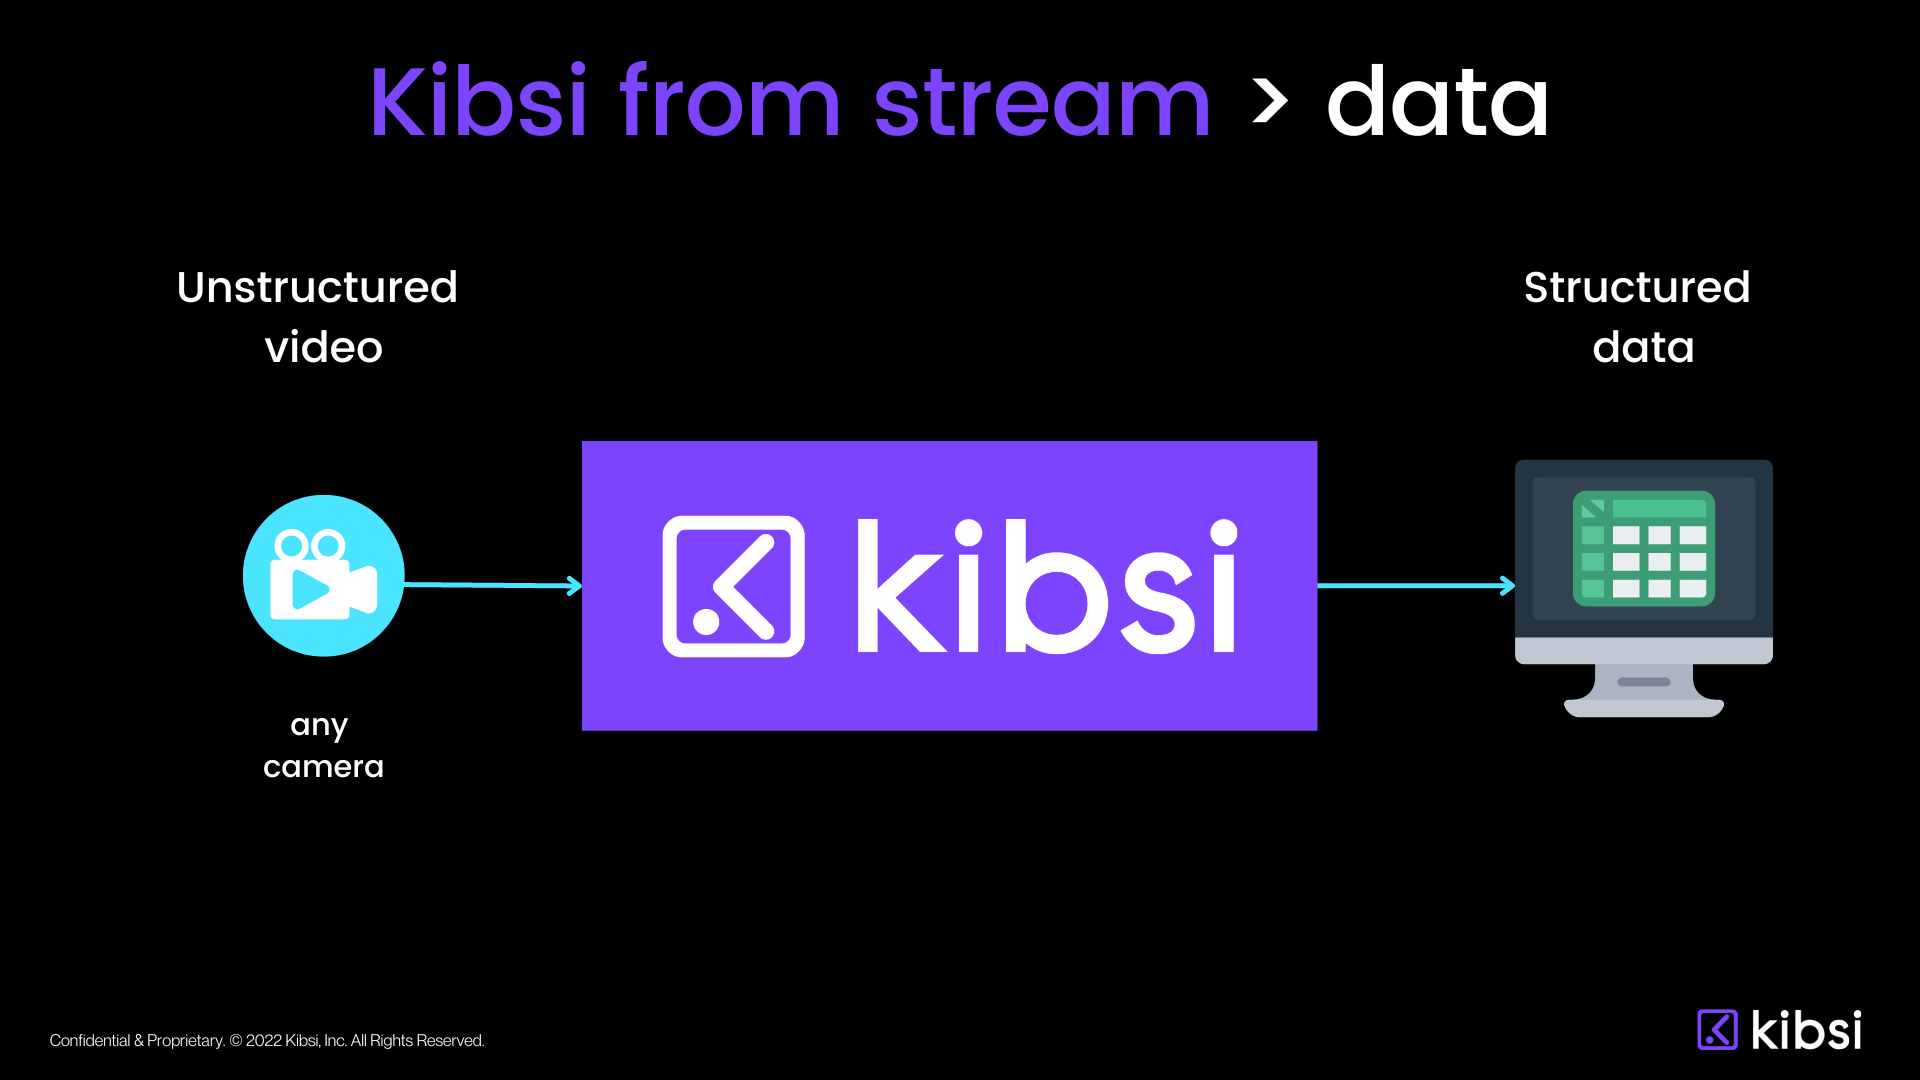 From stream to data